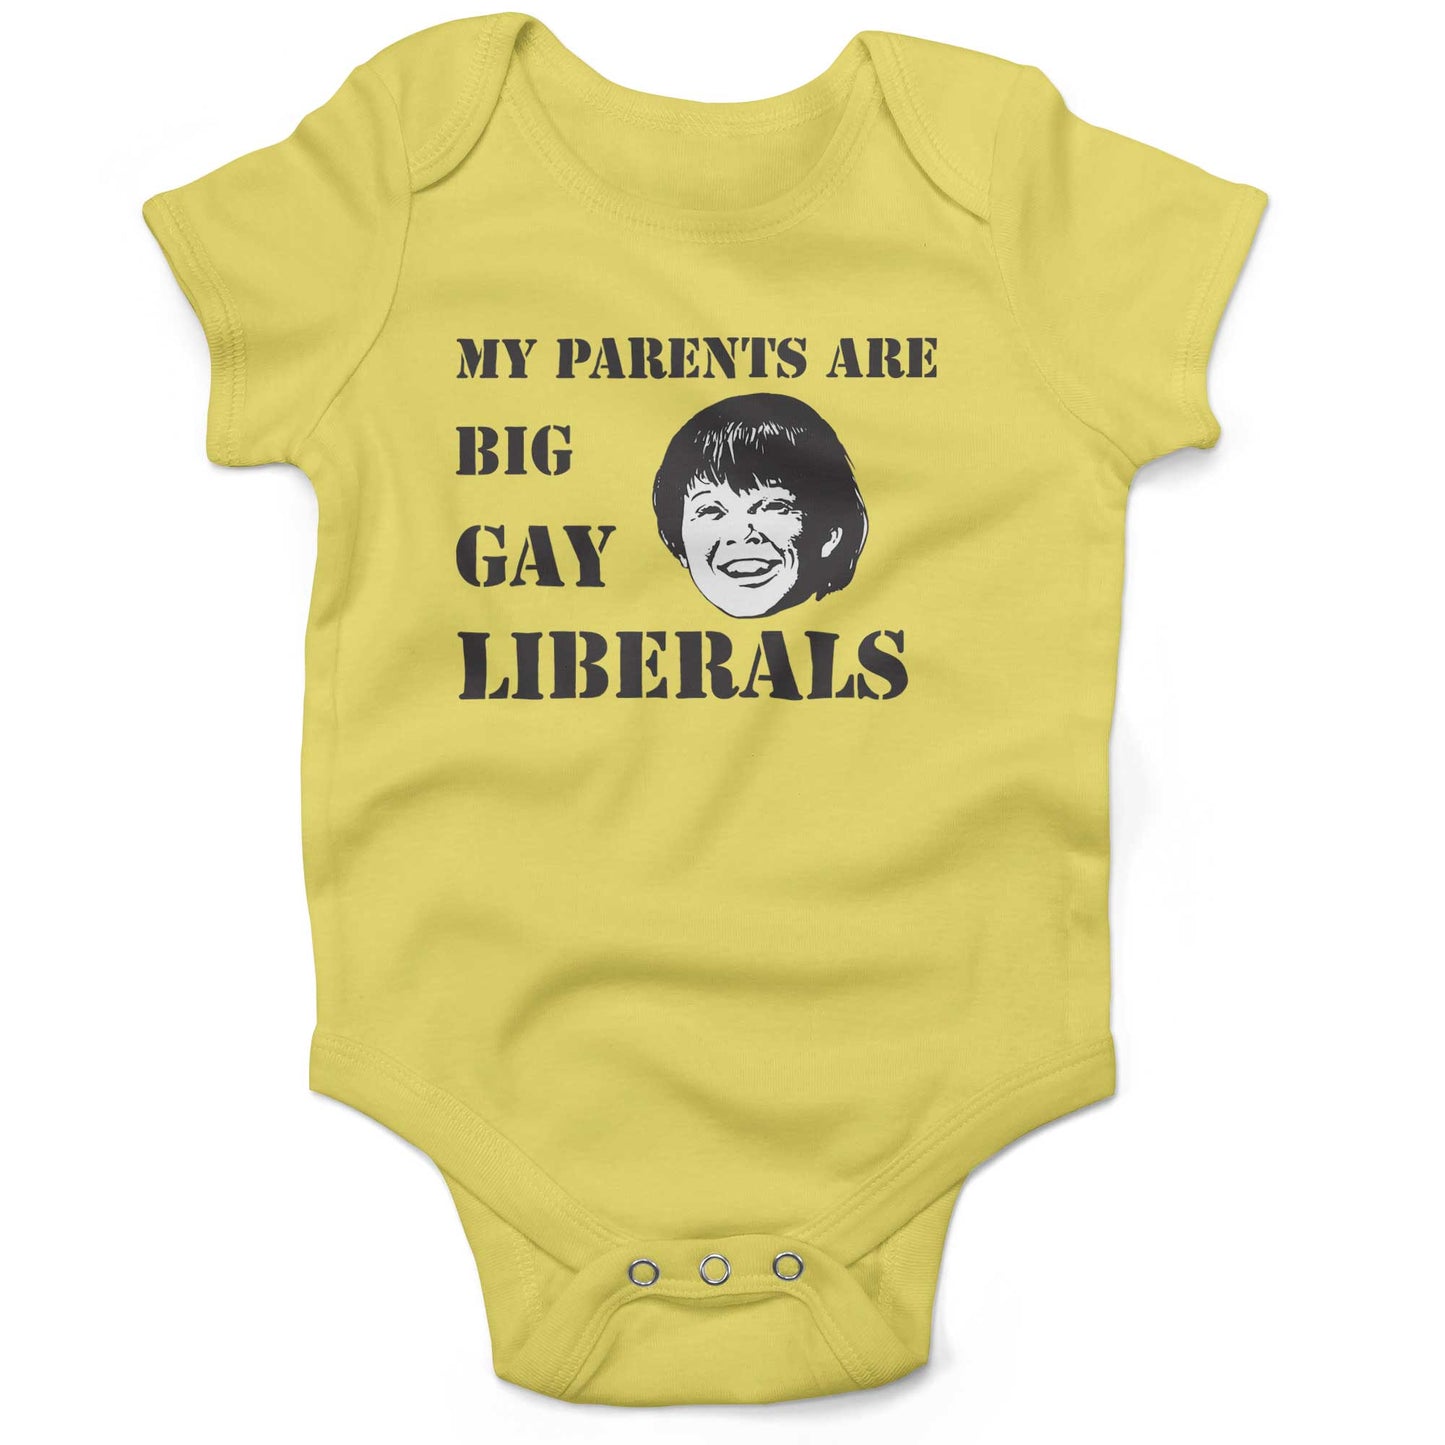 My Parents Are Big, Gay Liberals Infant Bodysuit or Raglan Baby Tee-Yellow-3-6 months